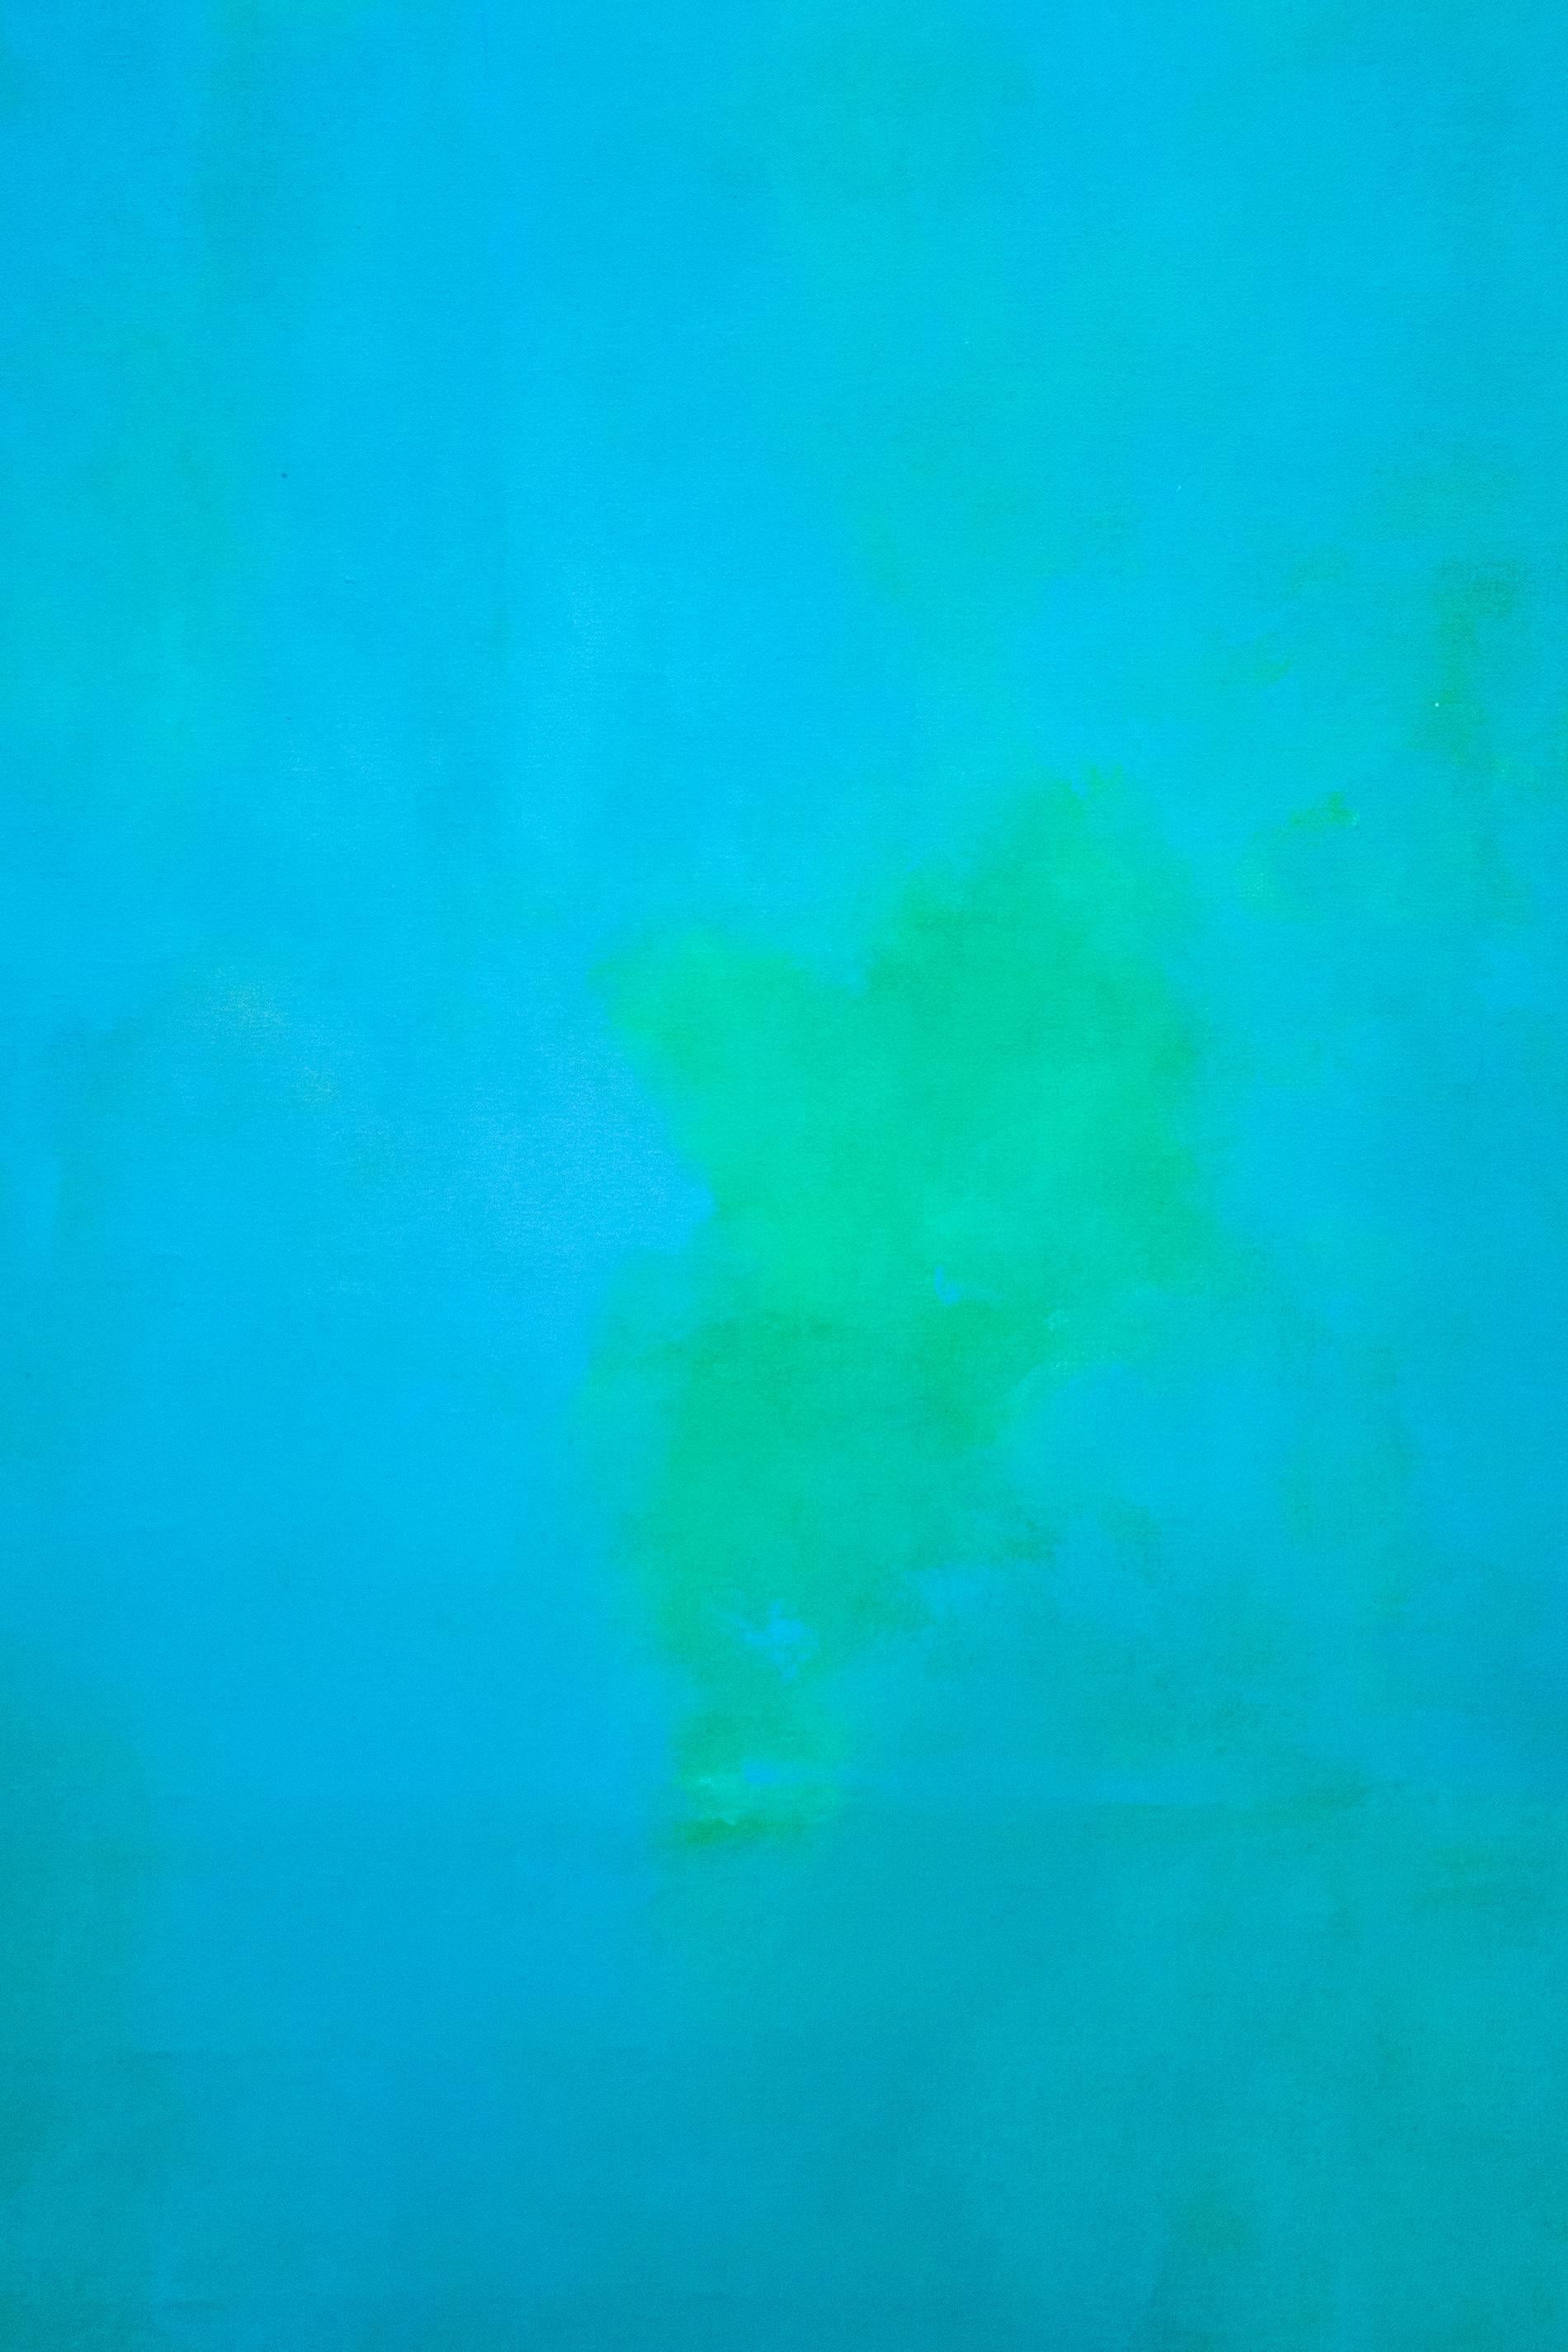 A flood of cerulean blue is directed by passages of moss green, turquoise, lime and a strip of brilliant yellow in this large acrylic canvas. The colors merge and move in a gentle eddy through this abstract composition revealing the subject of the